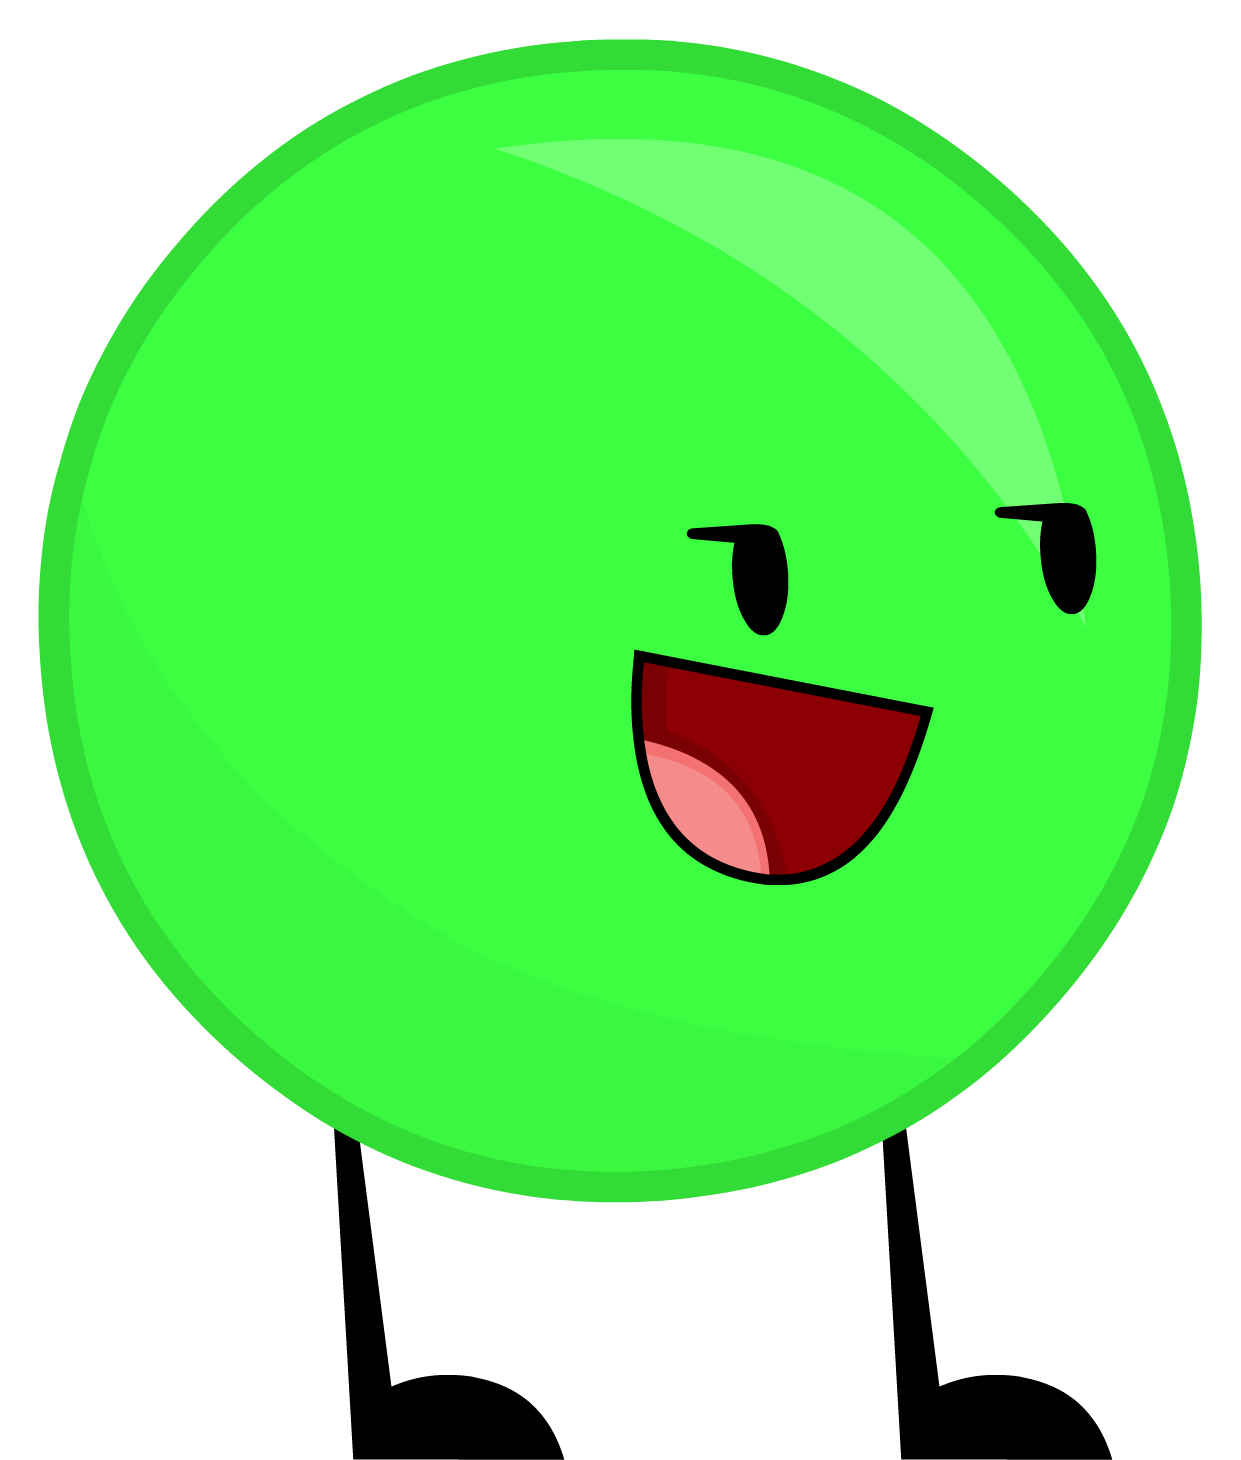 Peas clipart green object. Image armlesspea png anthropomorphic